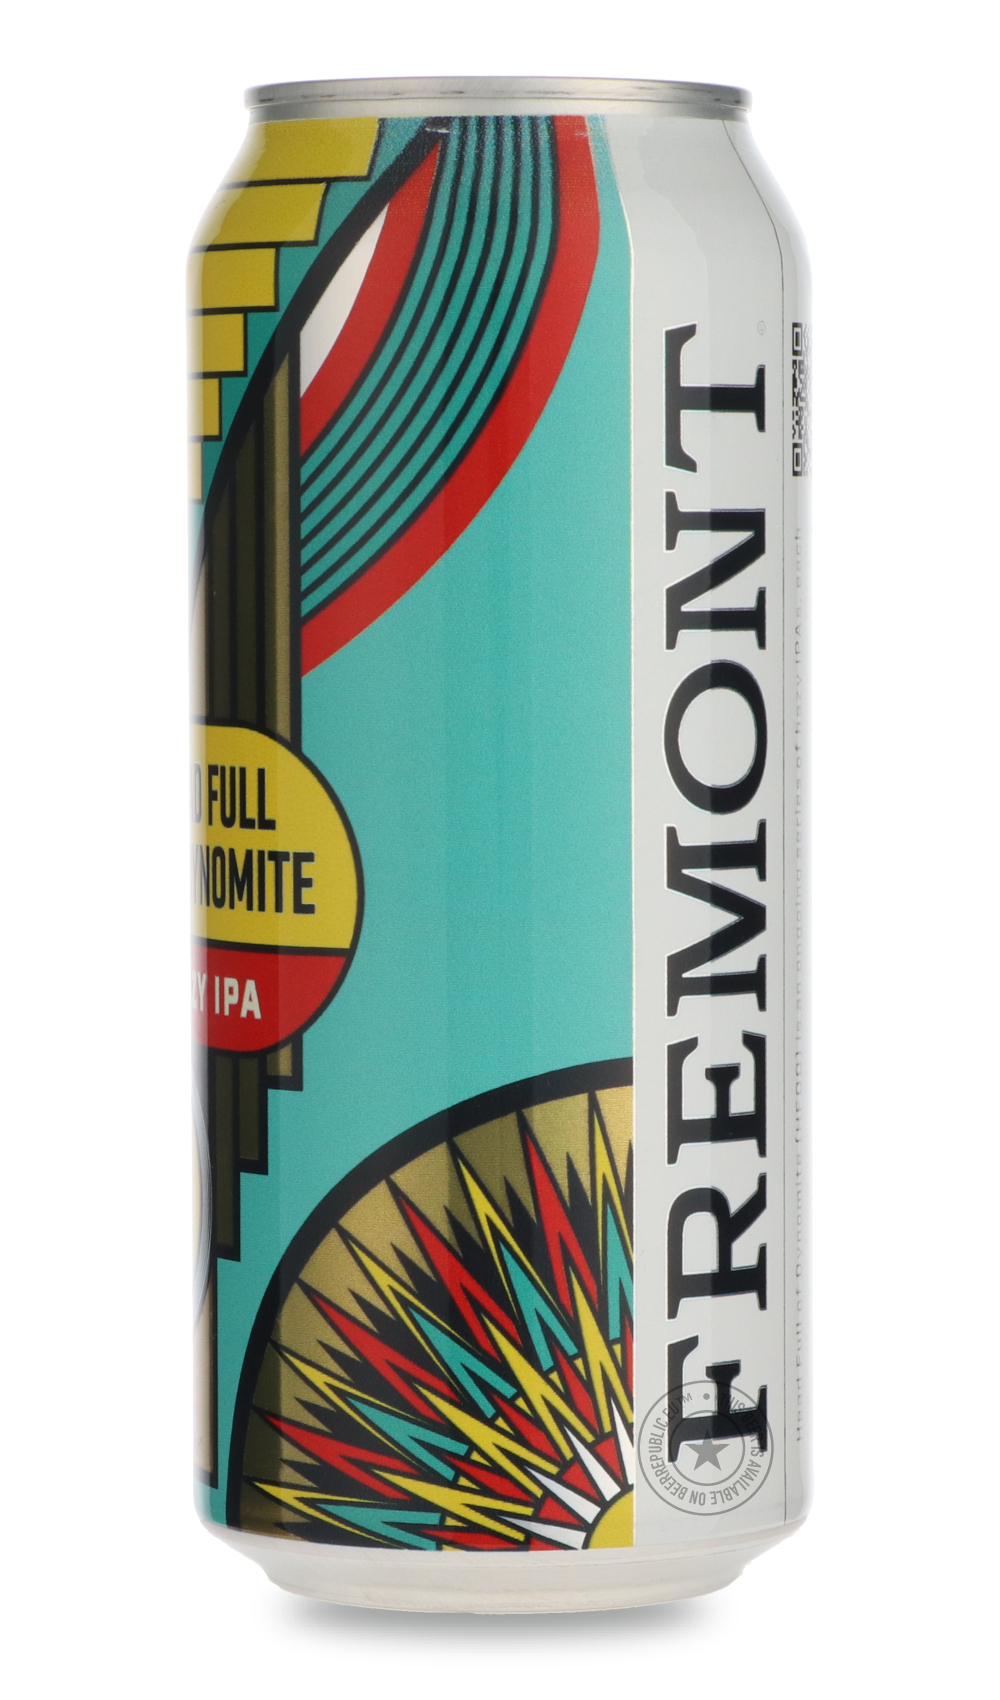 -Fremont- Head Full of Dynomite v.48-IPA- Only @ Beer Republic - The best online beer store for American & Canadian craft beer - Buy beer online from the USA and Canada - Bier online kopen - Amerikaans bier kopen - Craft beer store - Craft beer kopen - Amerikanisch bier kaufen - Bier online kaufen - Acheter biere online - IPA - Stout - Porter - New England IPA - Hazy IPA - Imperial Stout - Barrel Aged - Barrel Aged Imperial Stout - Brown - Dark beer - Blond - Blonde - Pilsner - Lager - Wheat - Weizen - Ambe